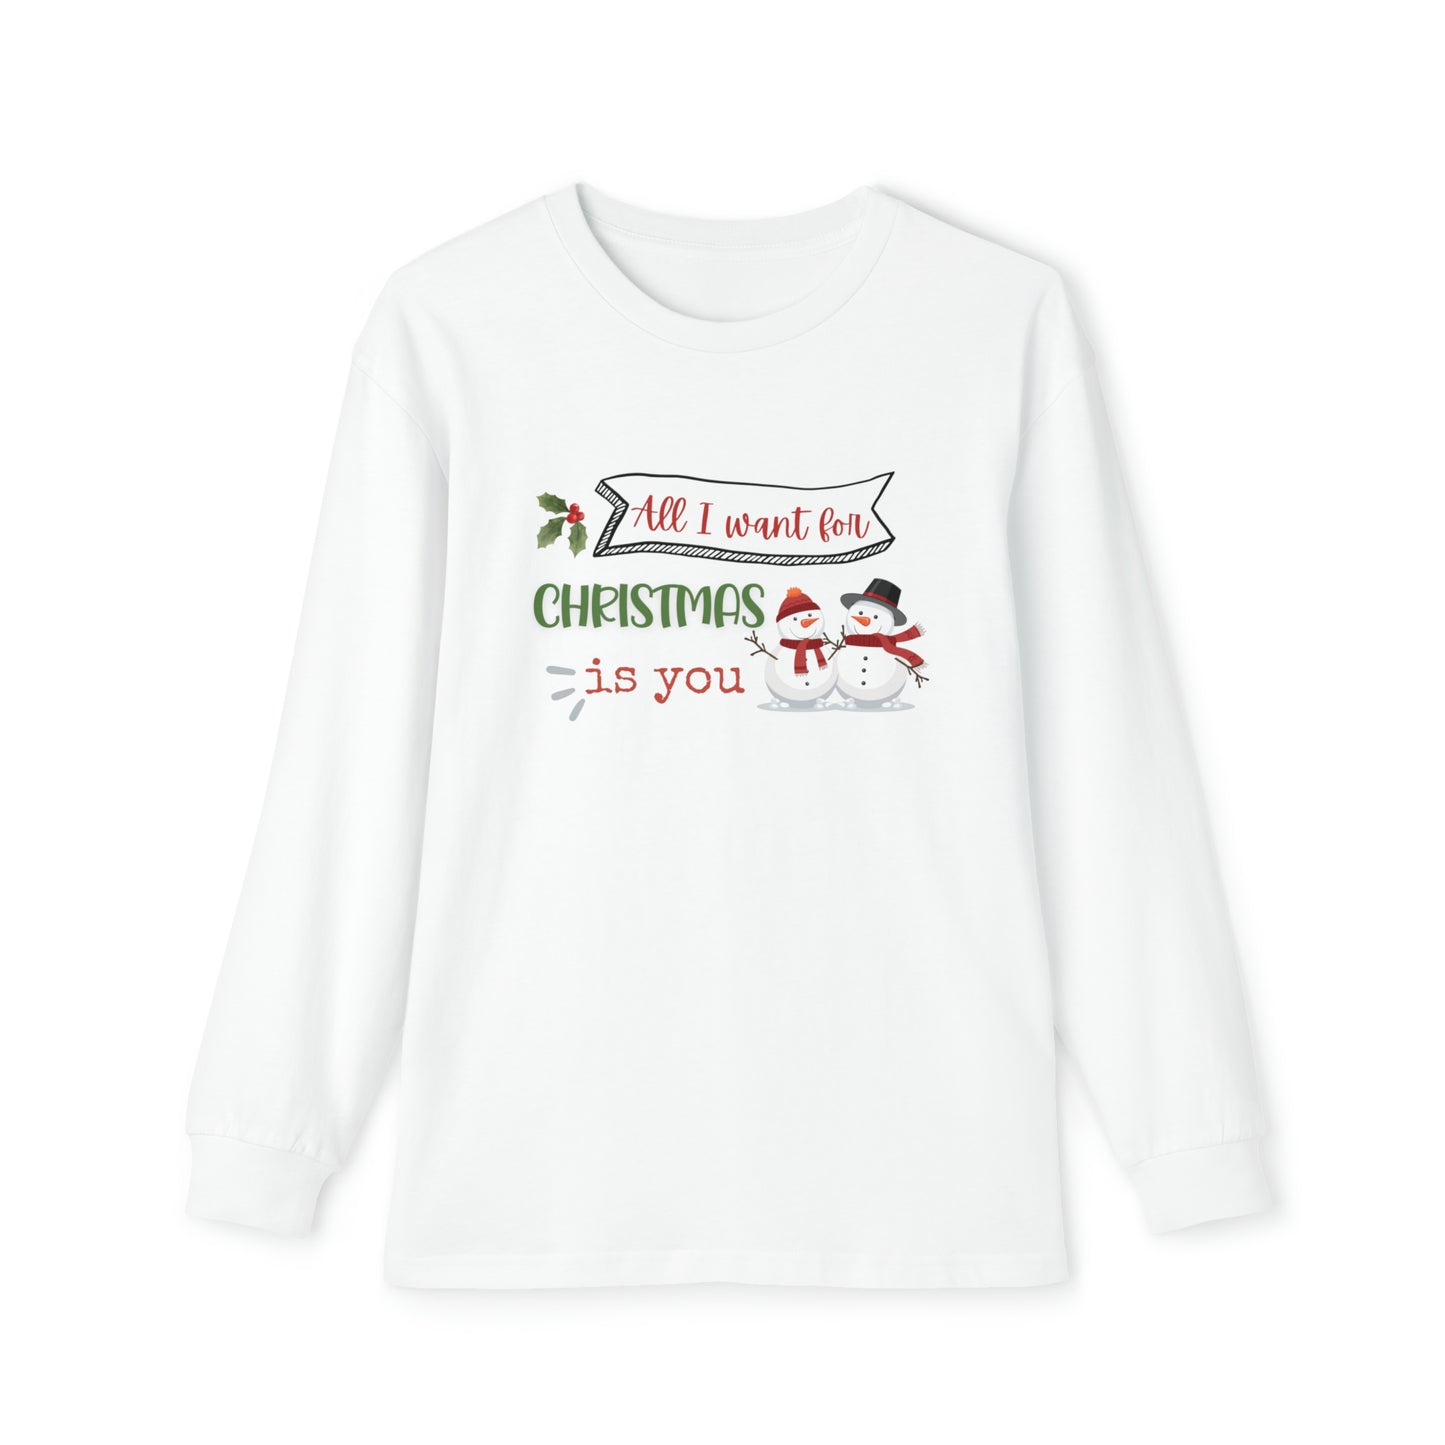 Youth Long Sleeve Holiday Outfit Set, Family Christmas Pajama Set, "All I want for Christmas is you" Shirt and Flannel Pant Set